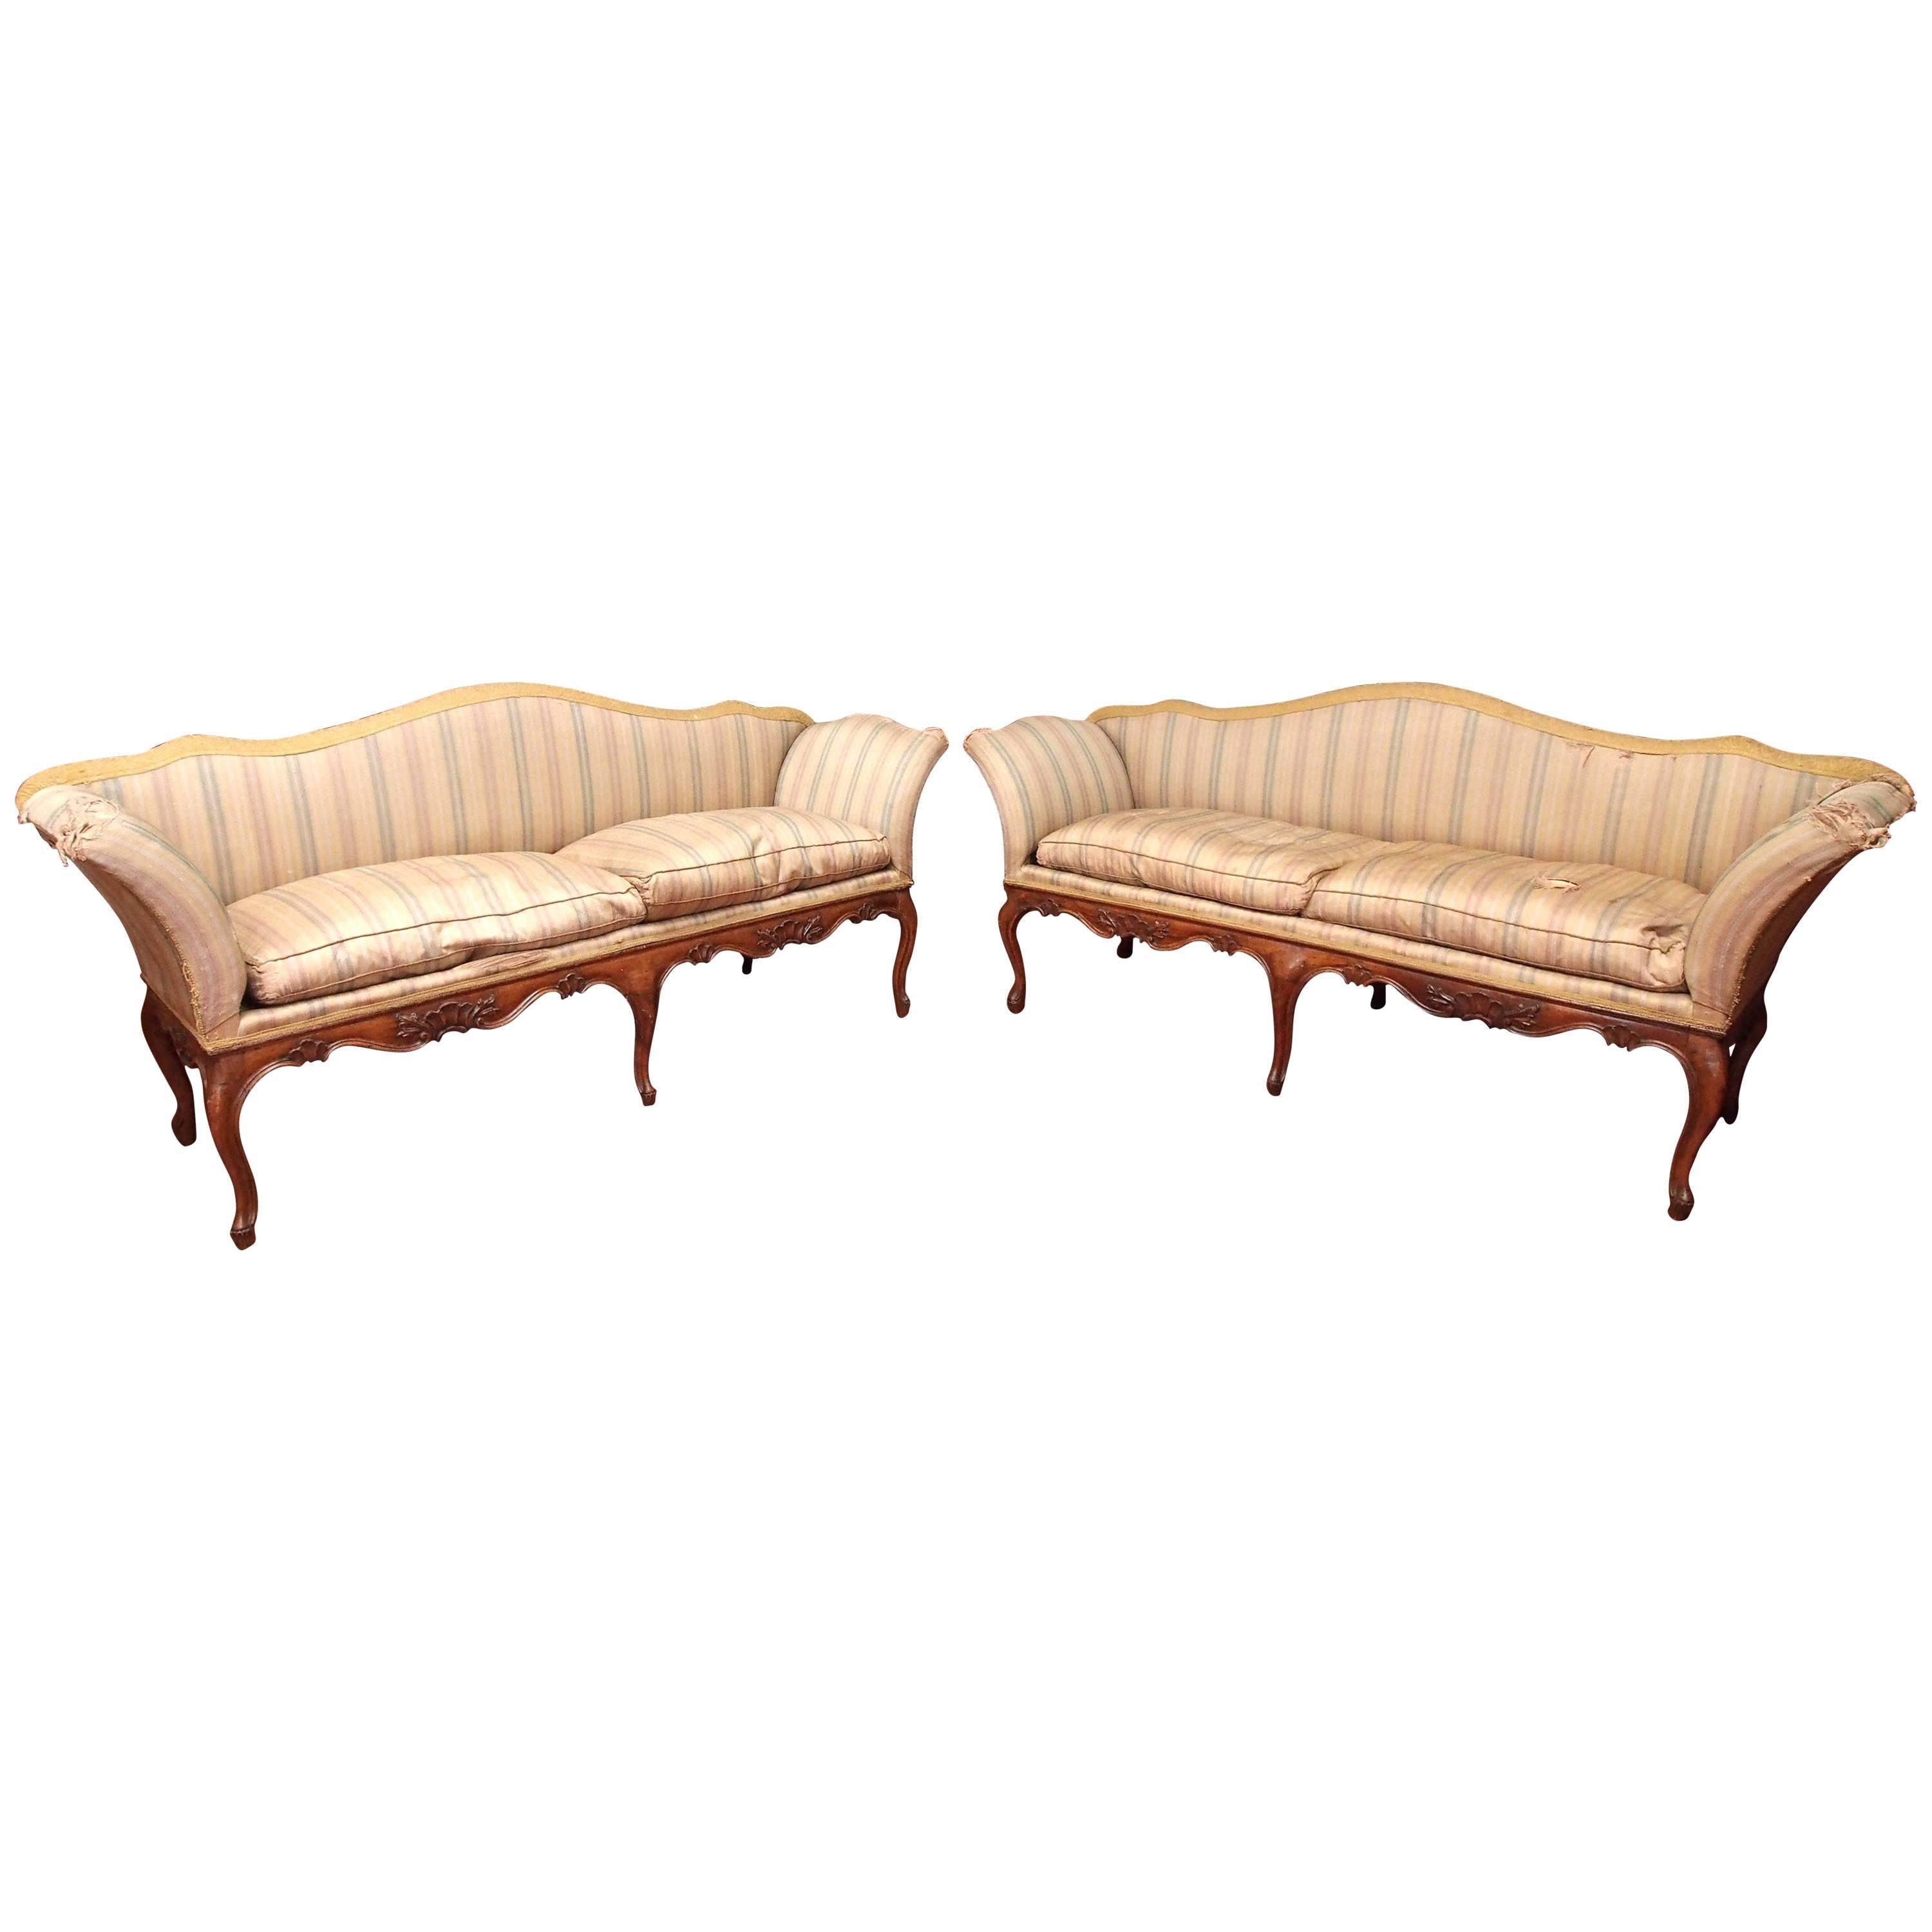 Pair of Italian Rococo Divani or Settees For Sale